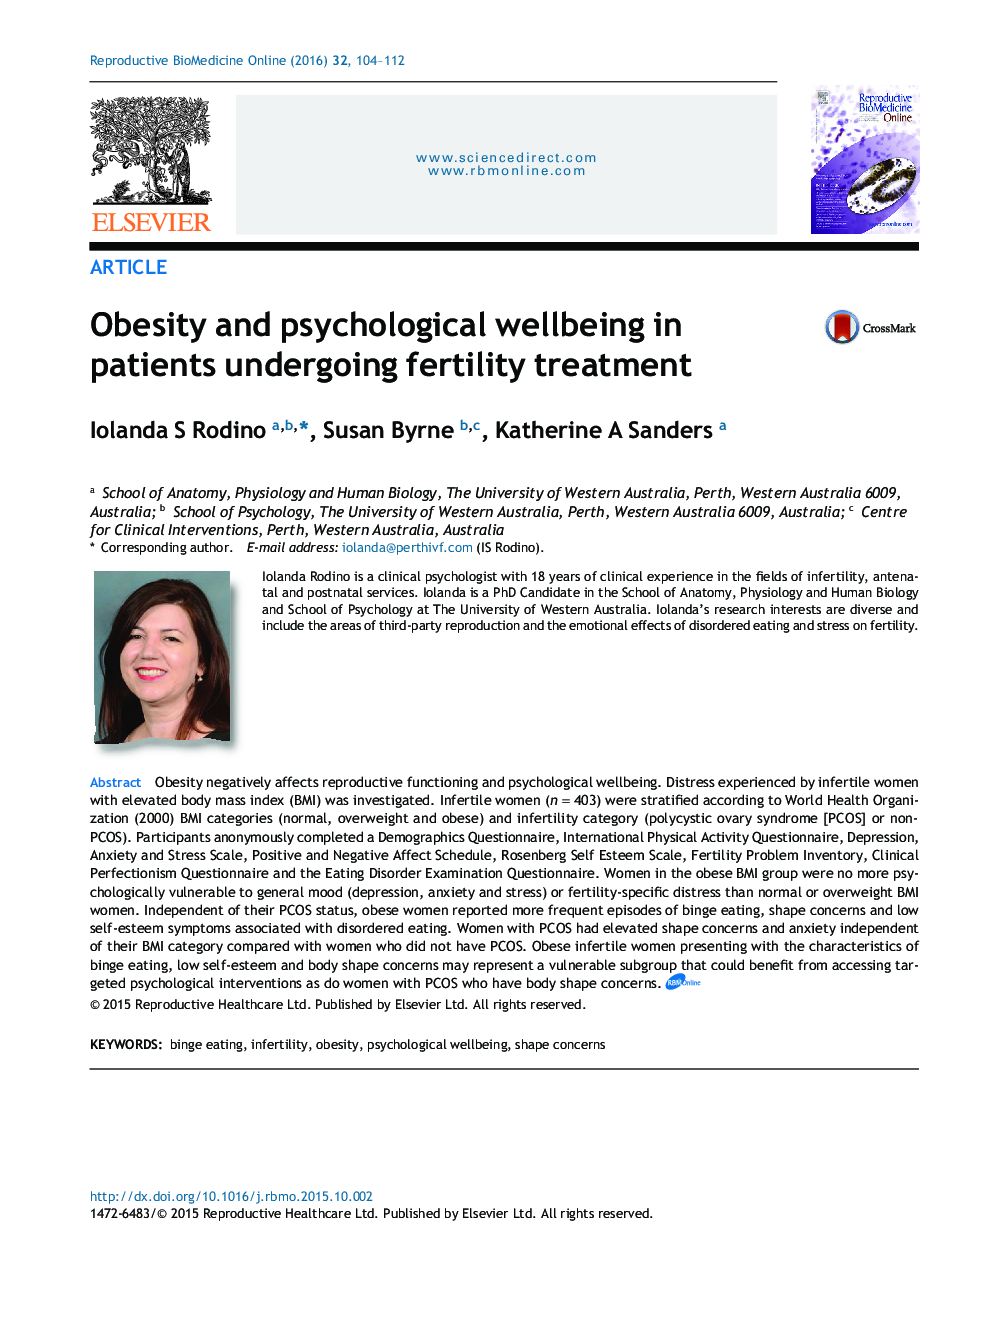 Obesity and psychological wellbeing in patients undergoing fertility treatment